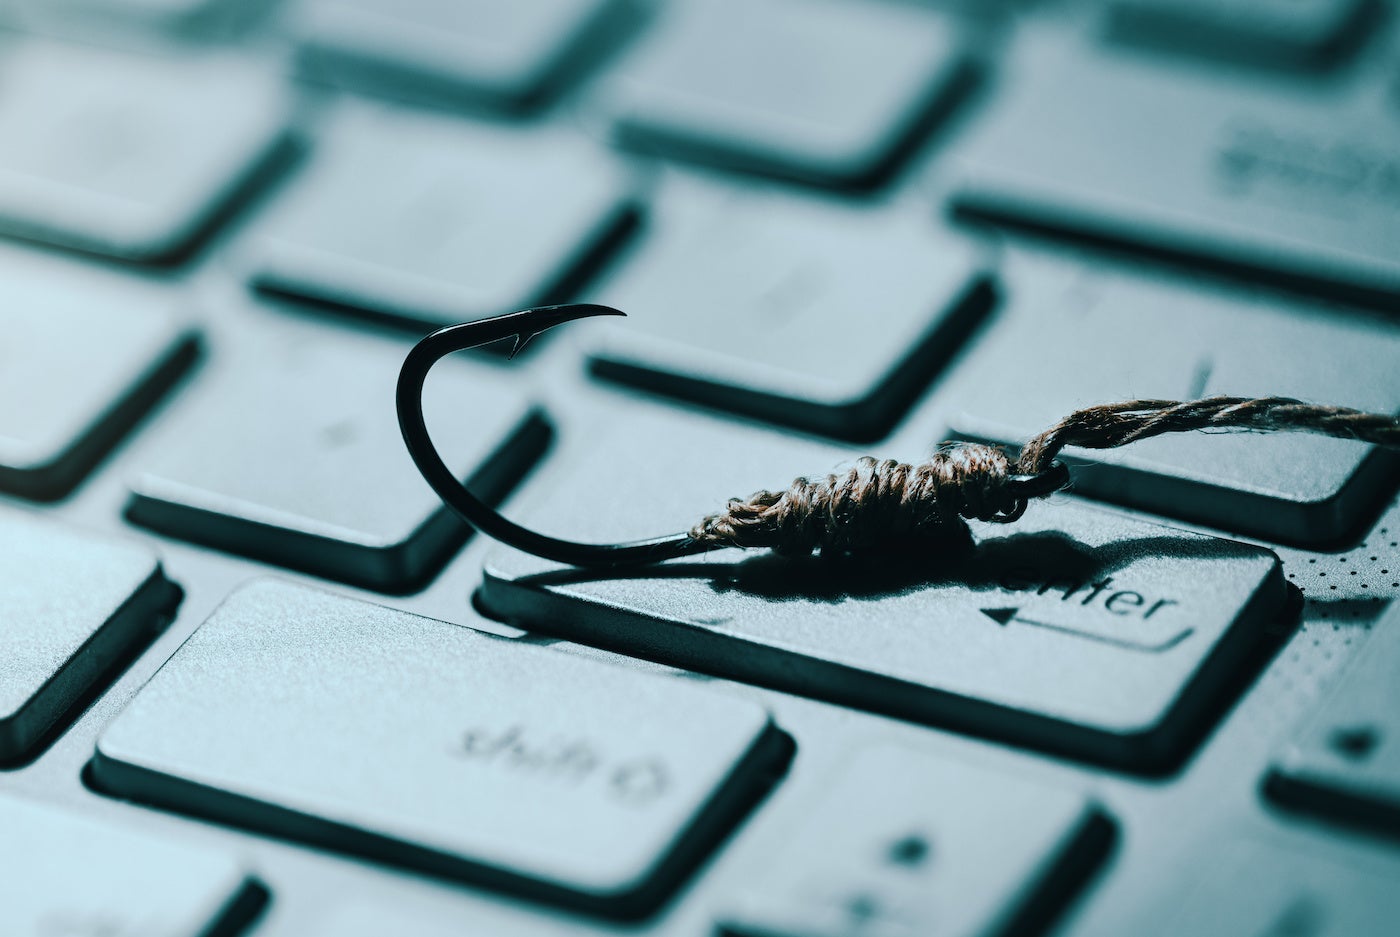 Spear Phishing vs Phishing: What Are The Main Differences?